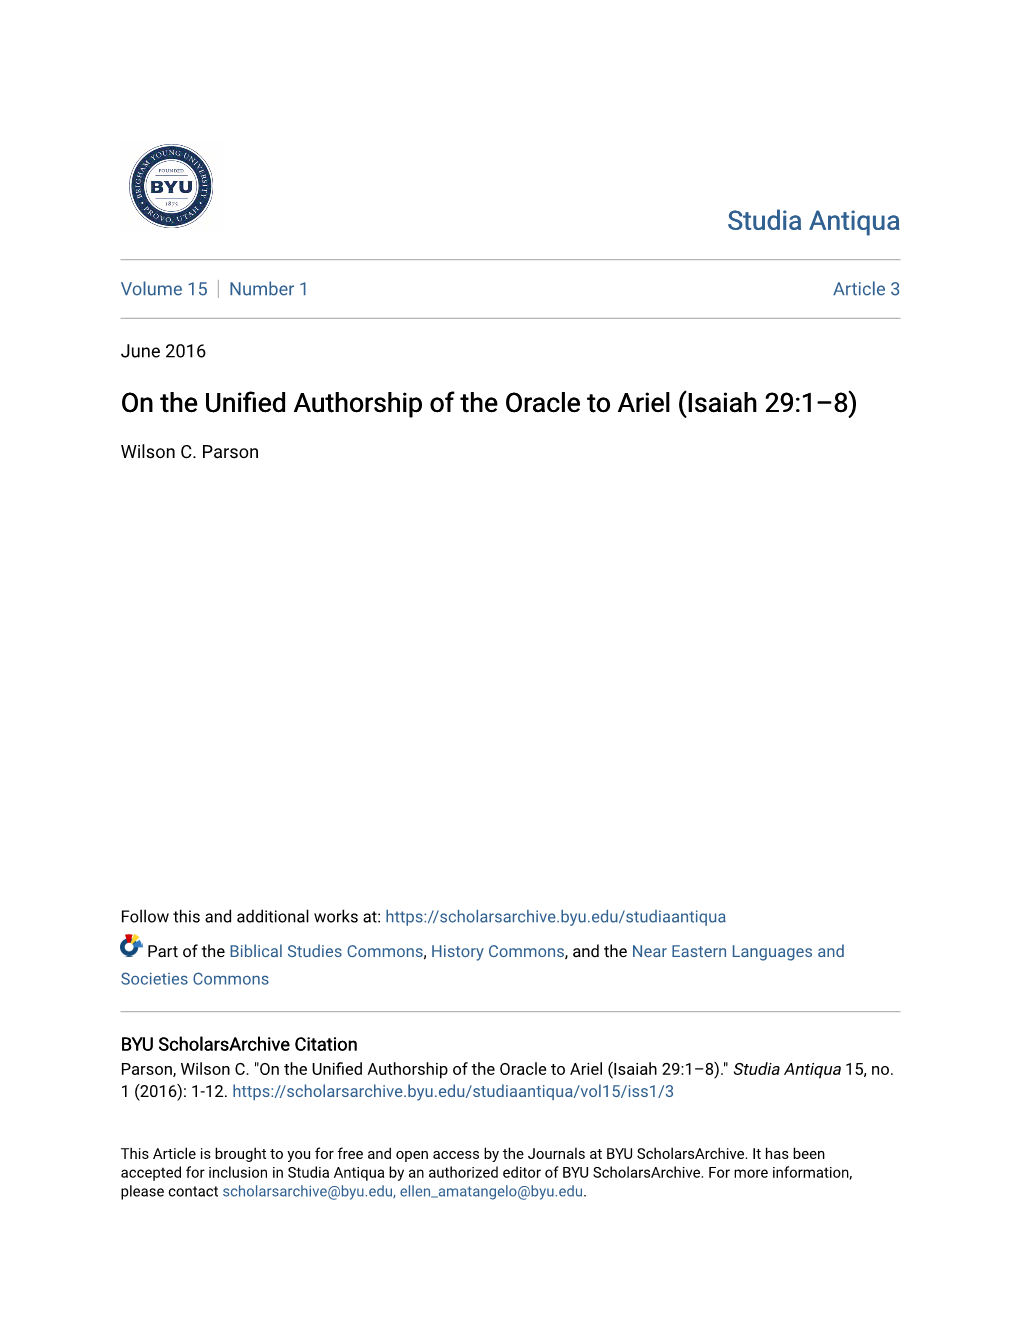 On the Unified Authorship of the Oracle to Ariel (Isaiah 29:1Â•Fi8)